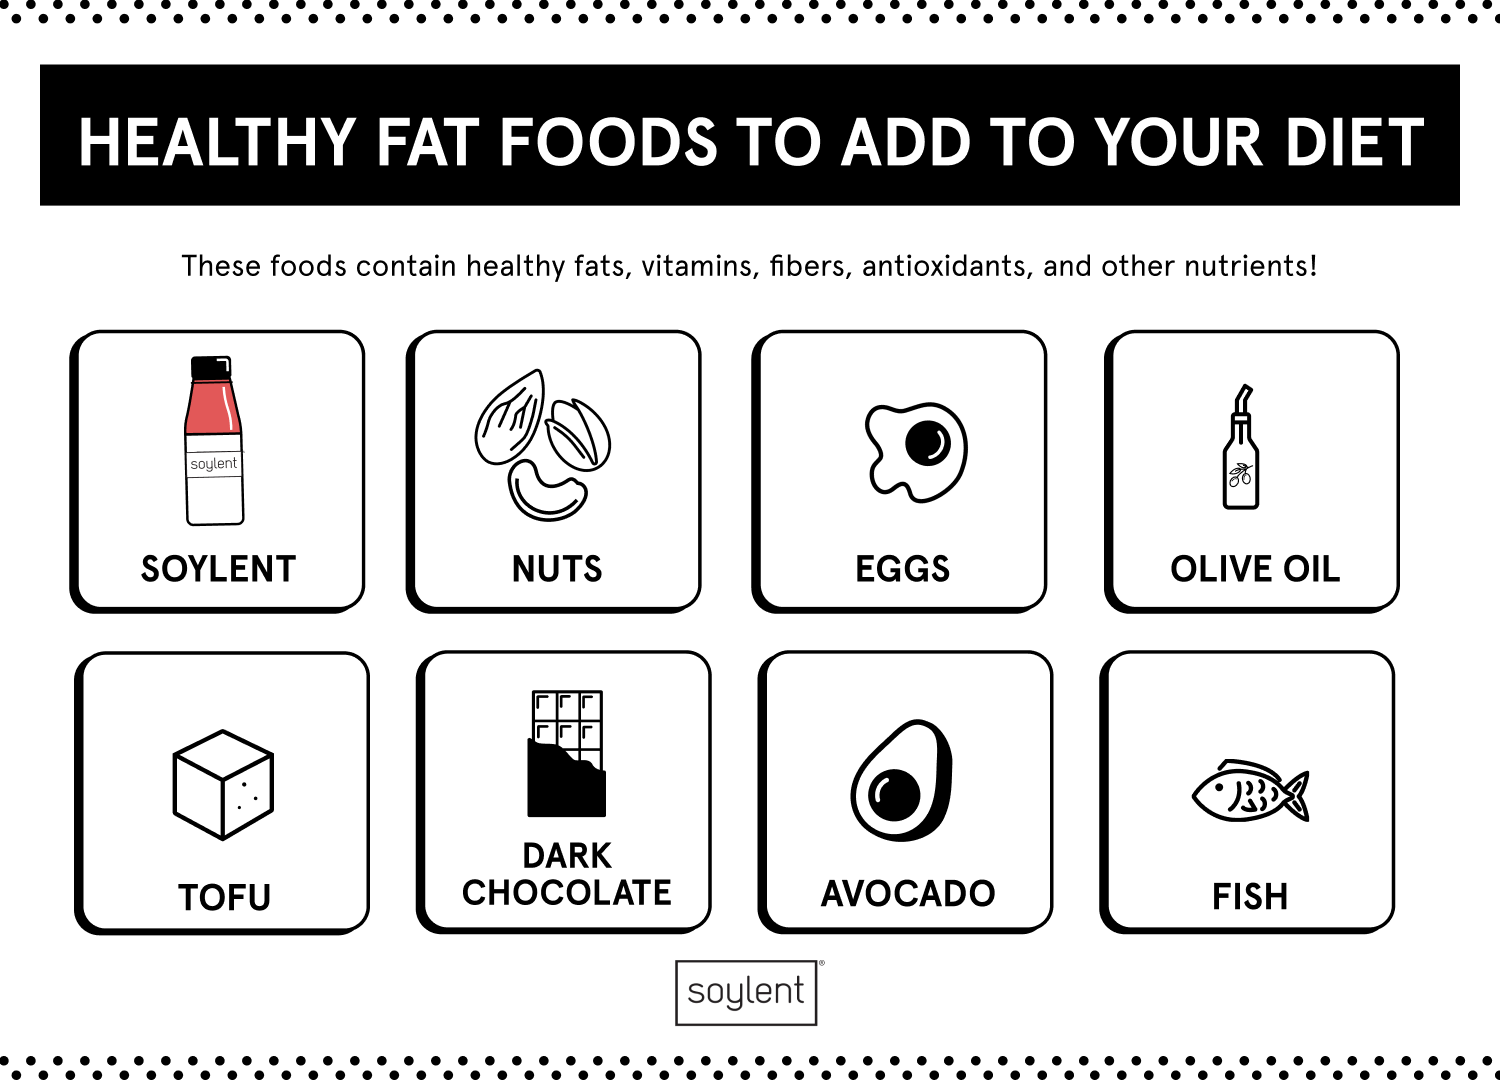 Healthy Fat Foods to Add to Your Diet